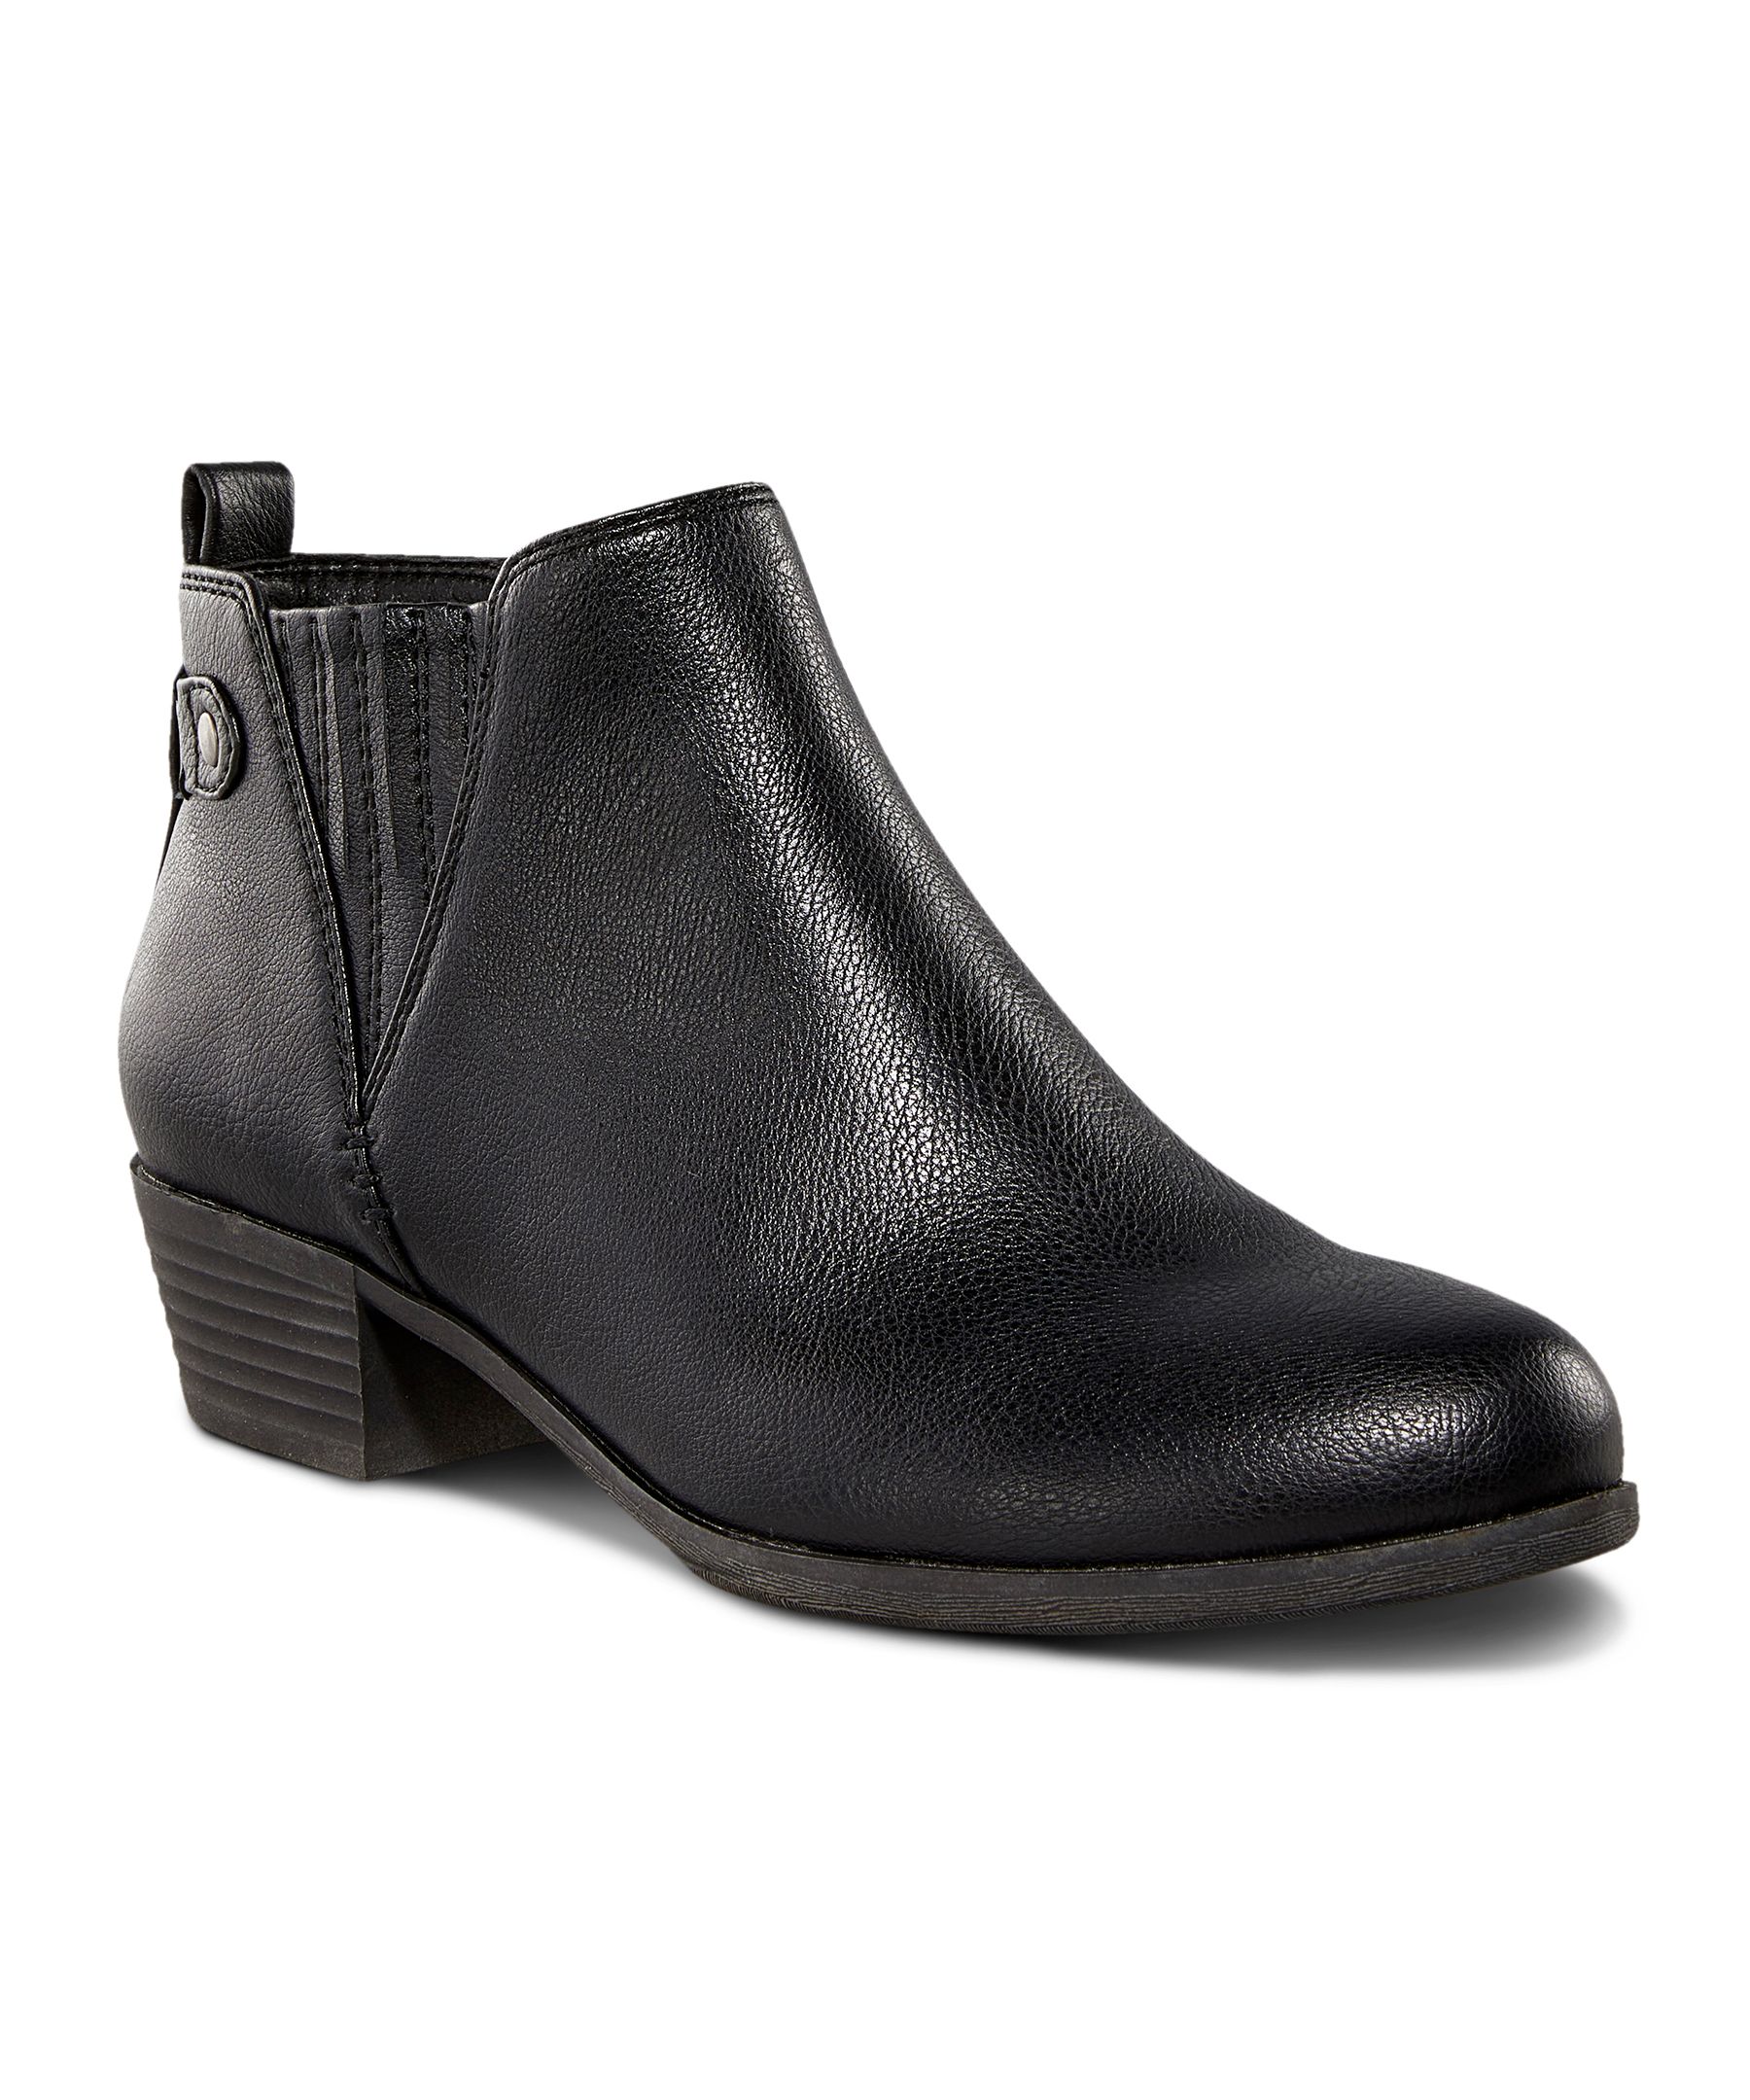 Women's Pammie Ankle Boots | Marks